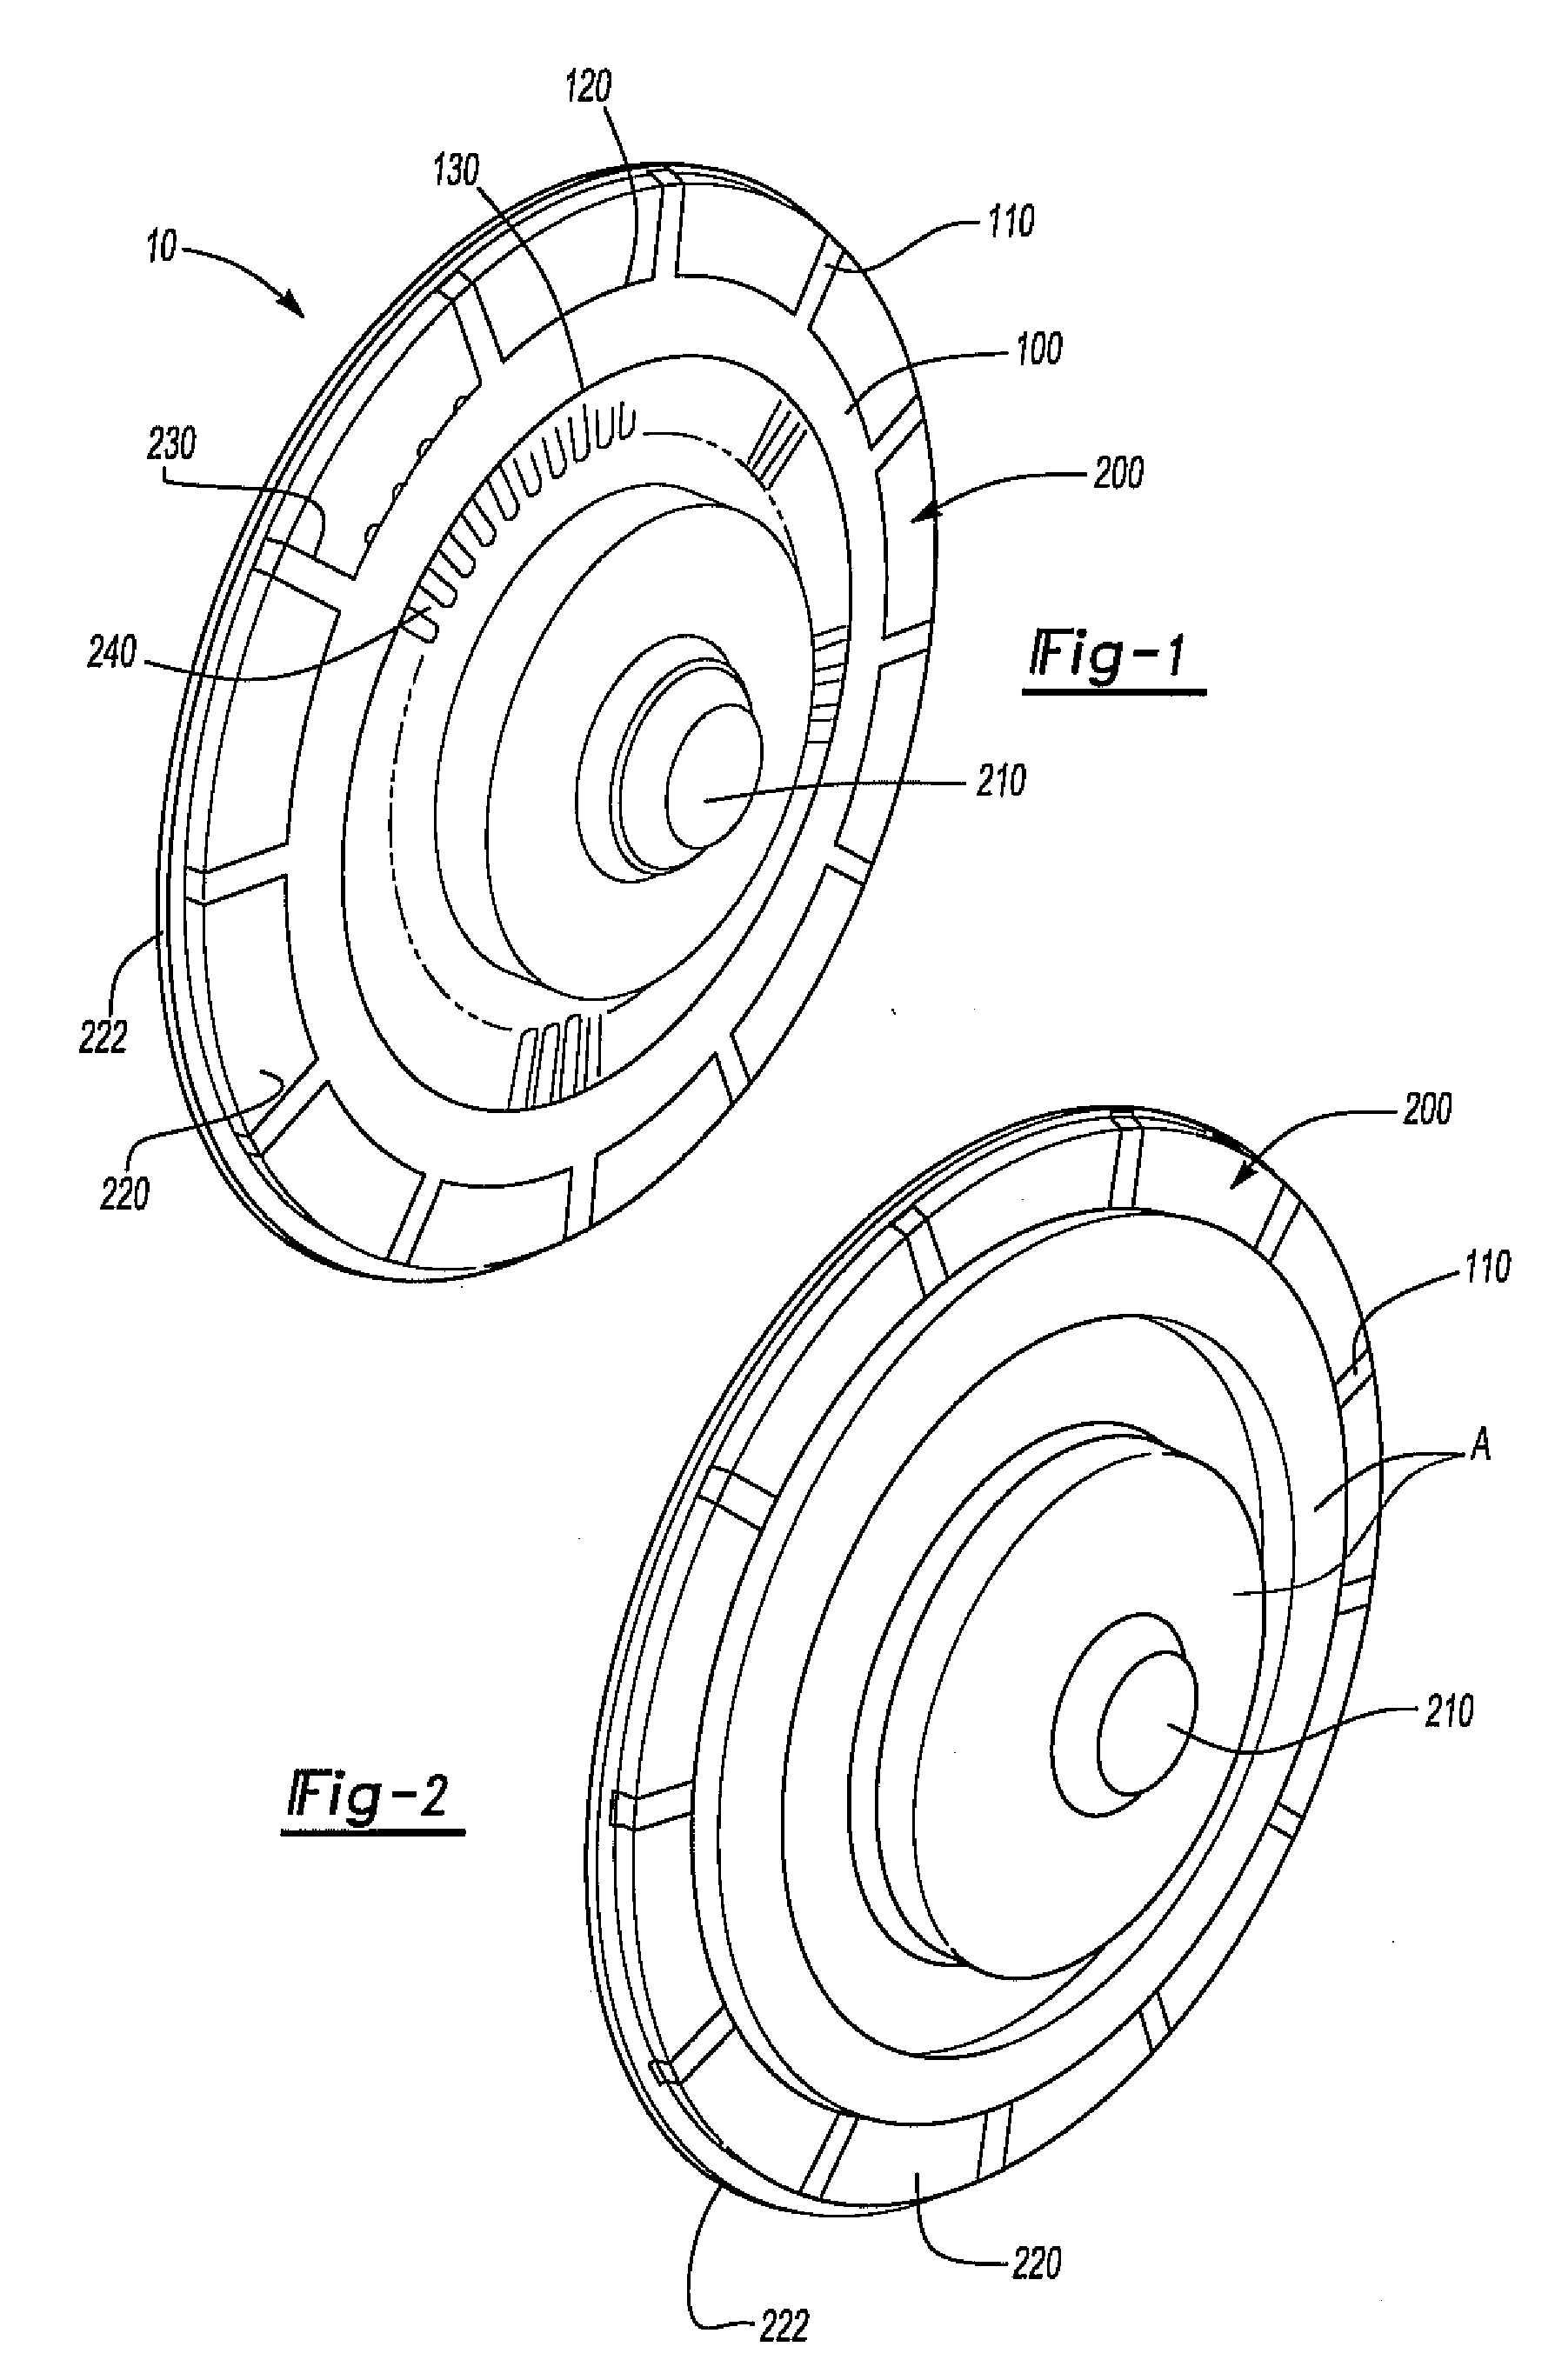 Insert for manufacture of an enhanced sound dampening composite rotor casting and method thereof